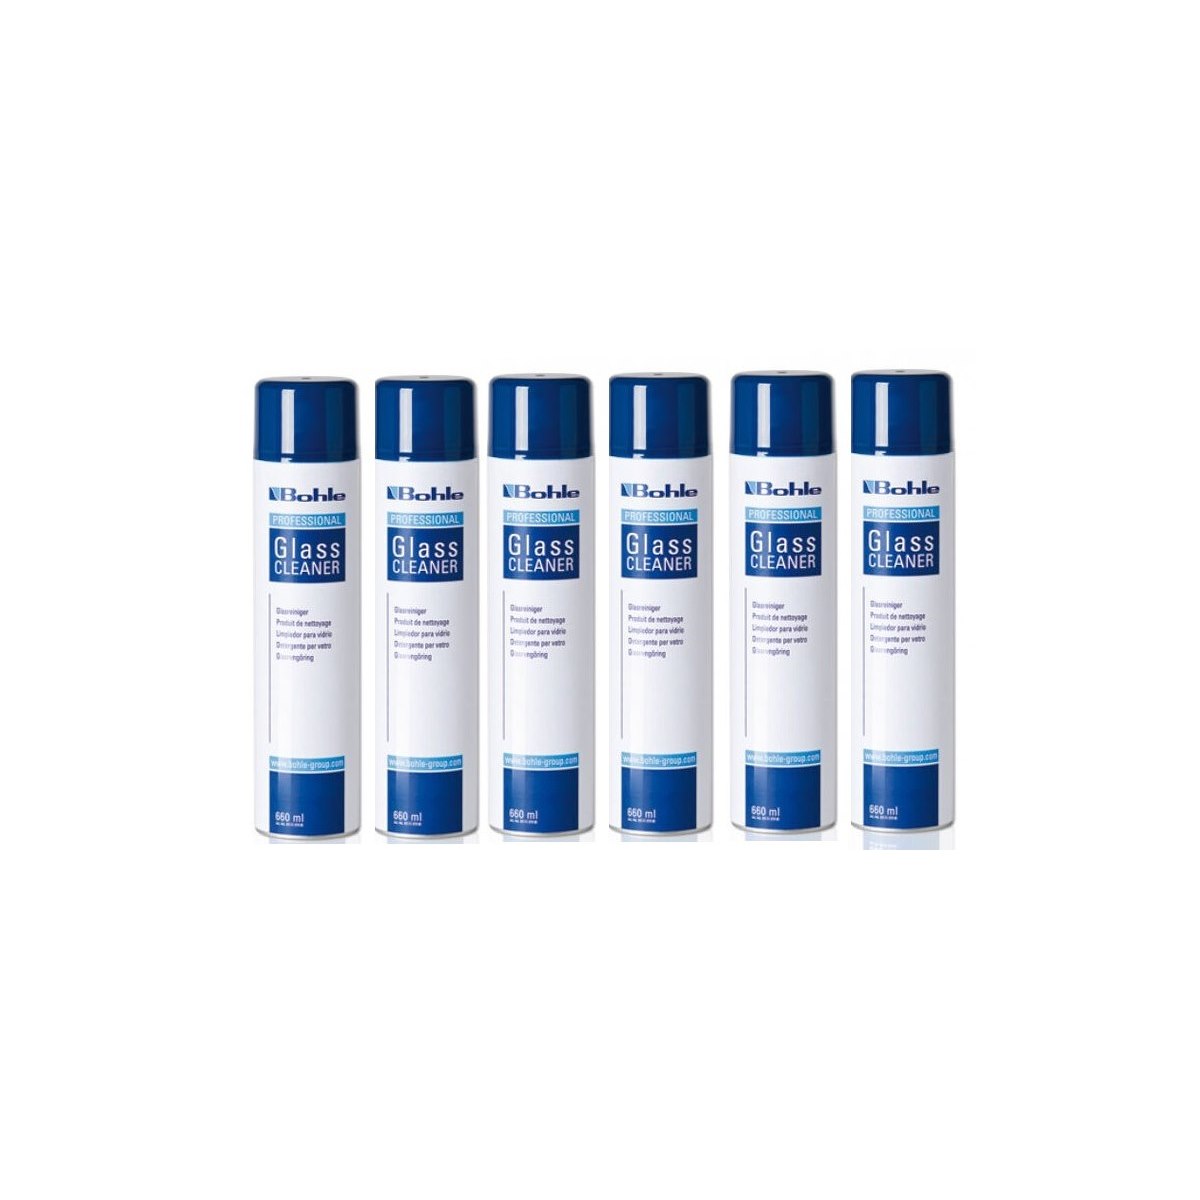 Case of 6 Bohle Professional Glass Cleaner Spray 600ml